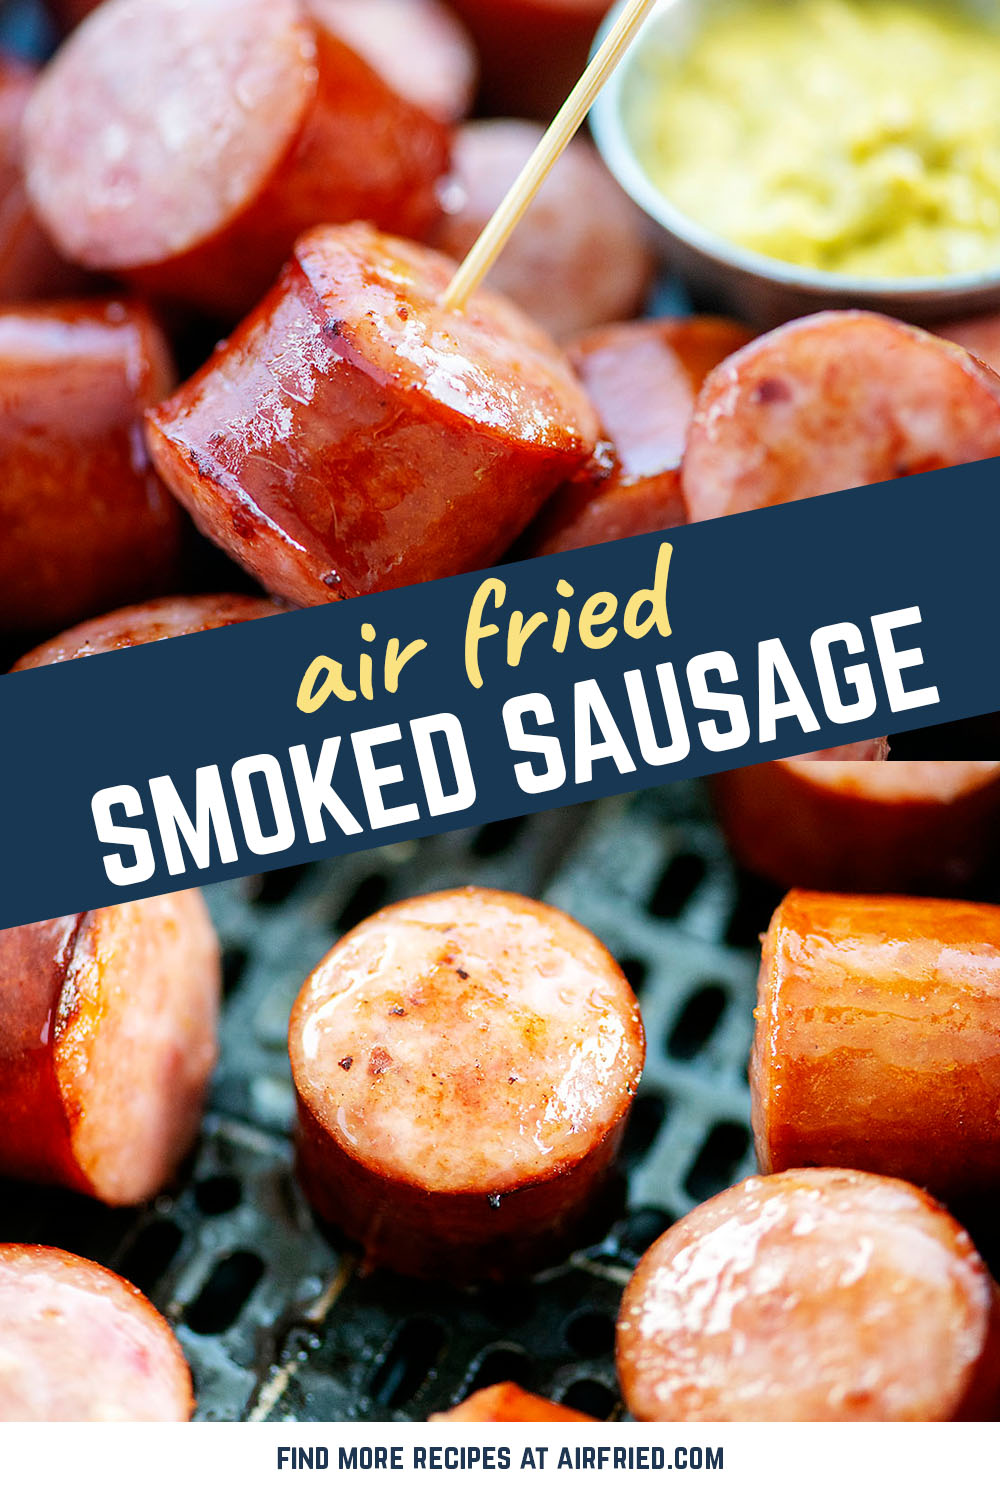 Air fryer smoked sausages make for a great appetizer or light meal!